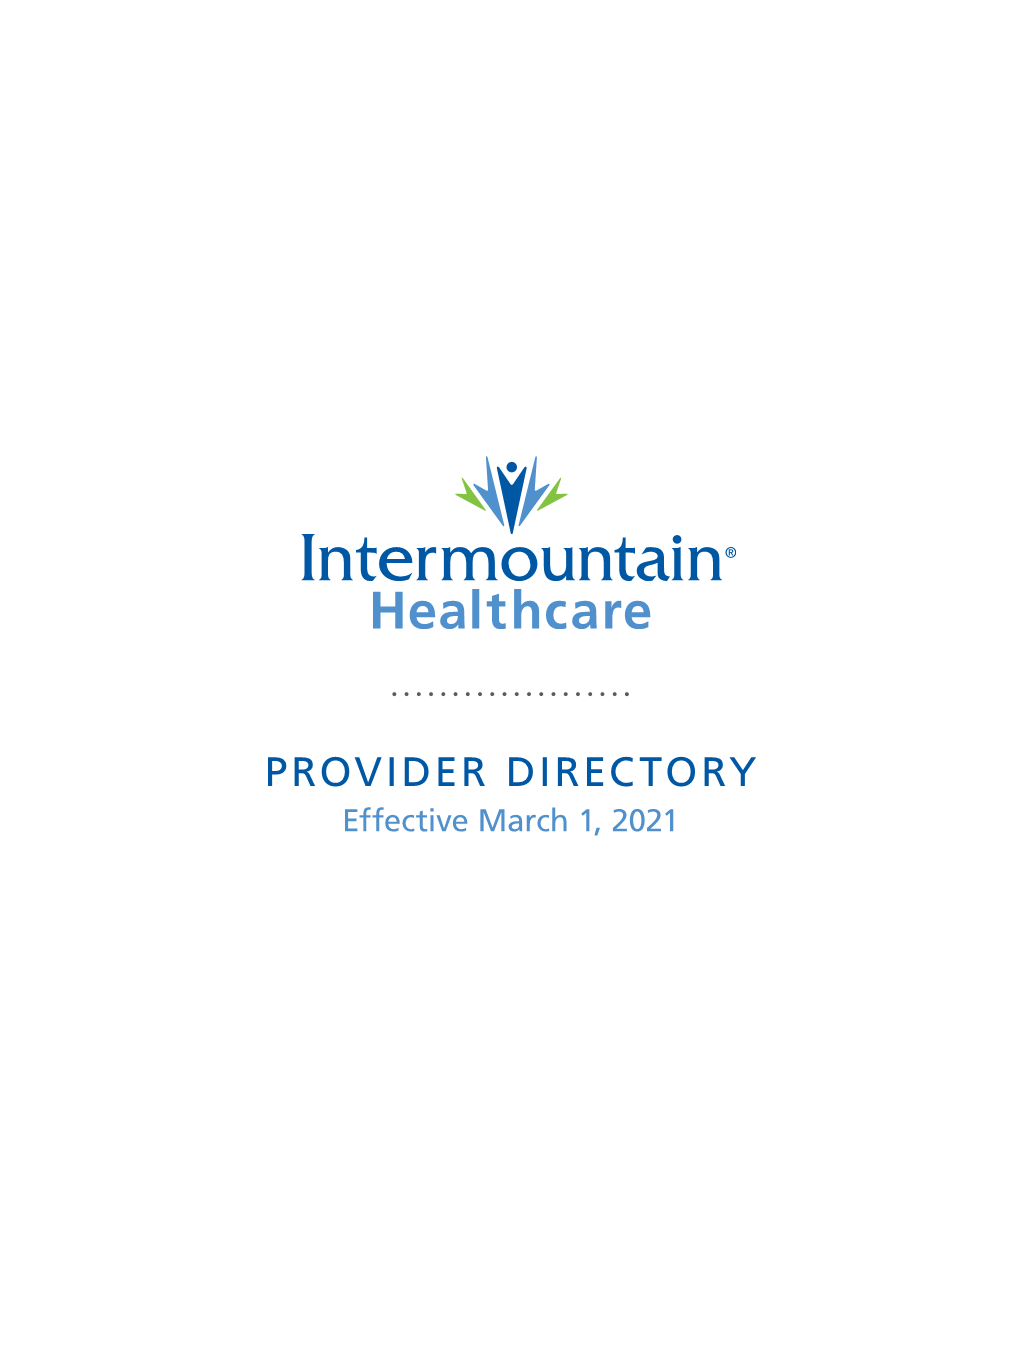 PROVIDER DIRECTORY Effective March 1, 2021 Table of Contents